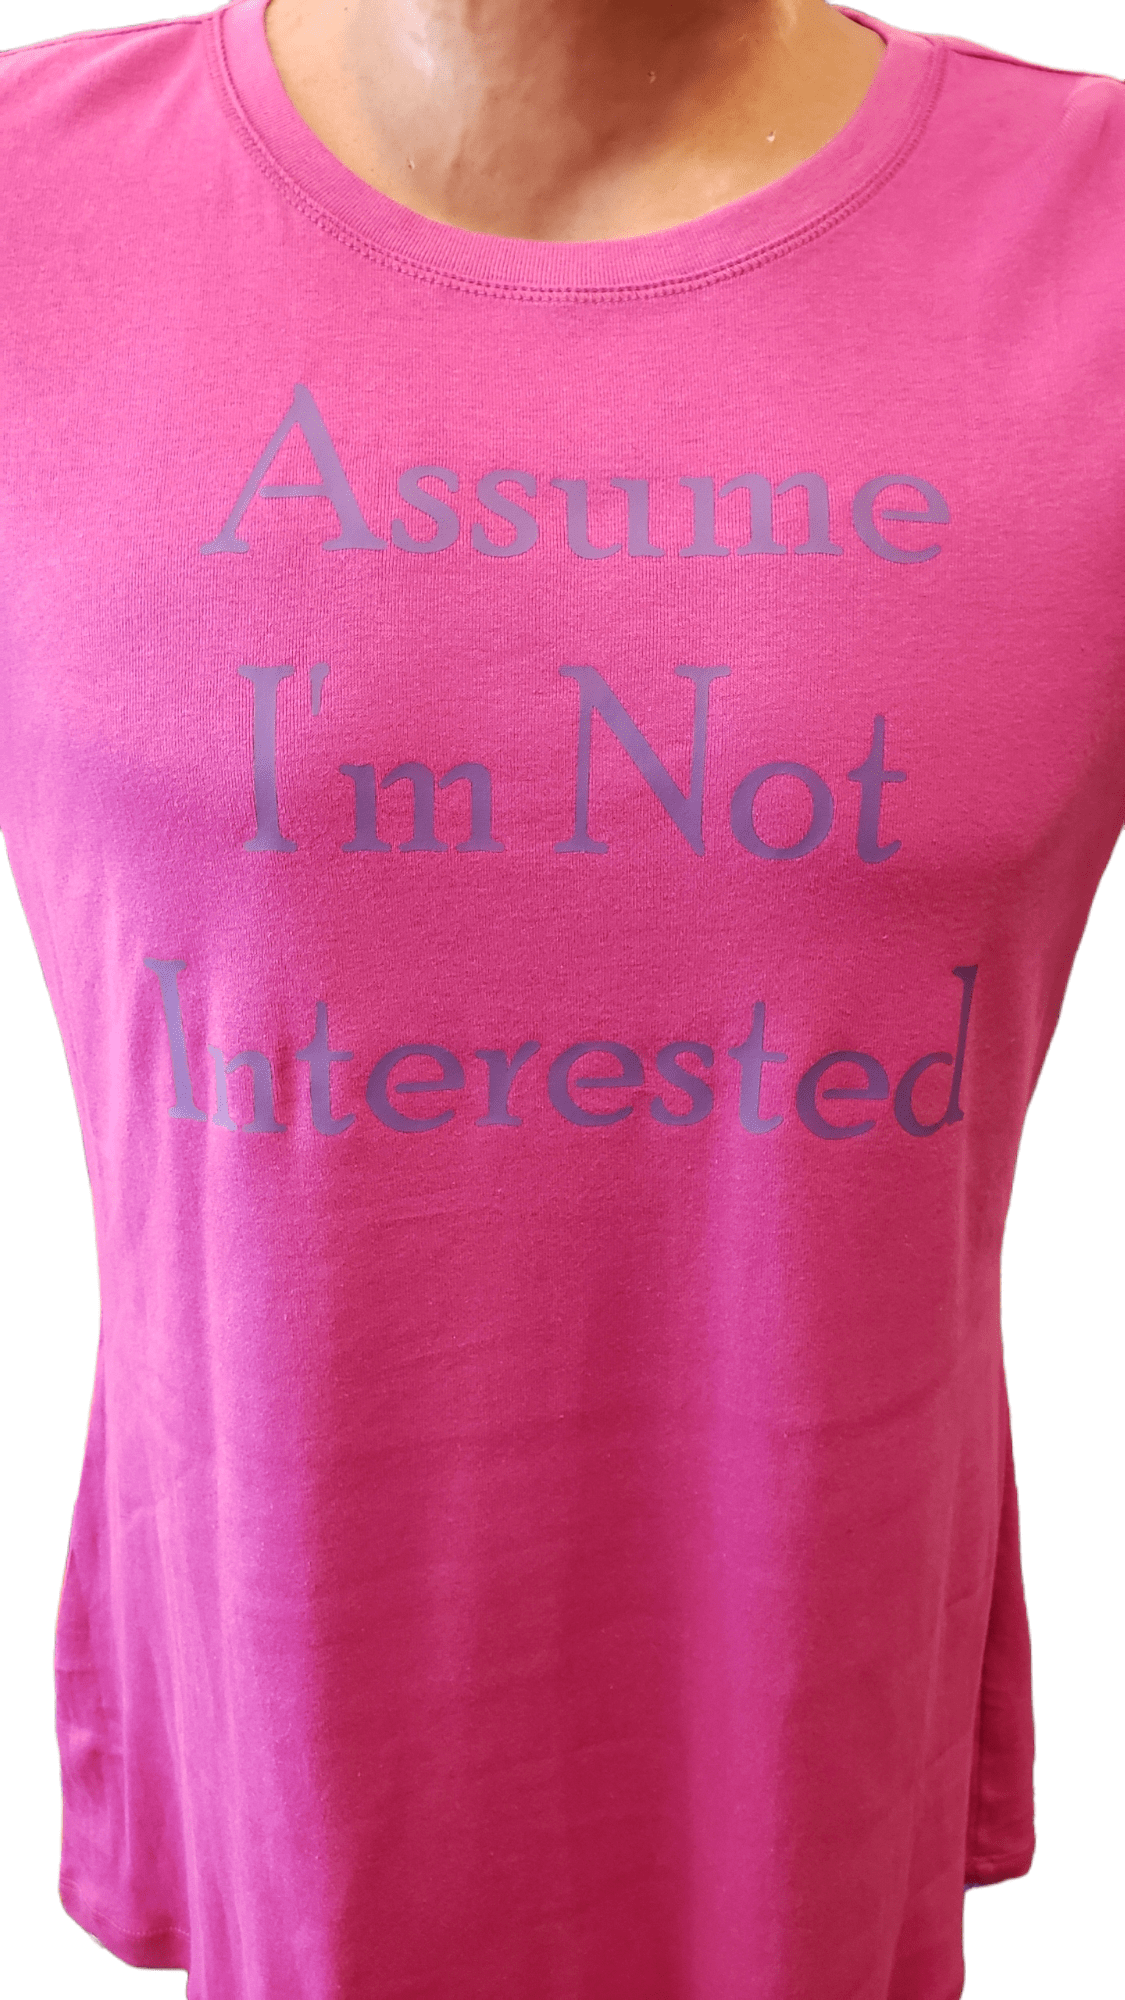 Carrot Stick Sports Assume I'm Not Interested Ladies T-Shirt